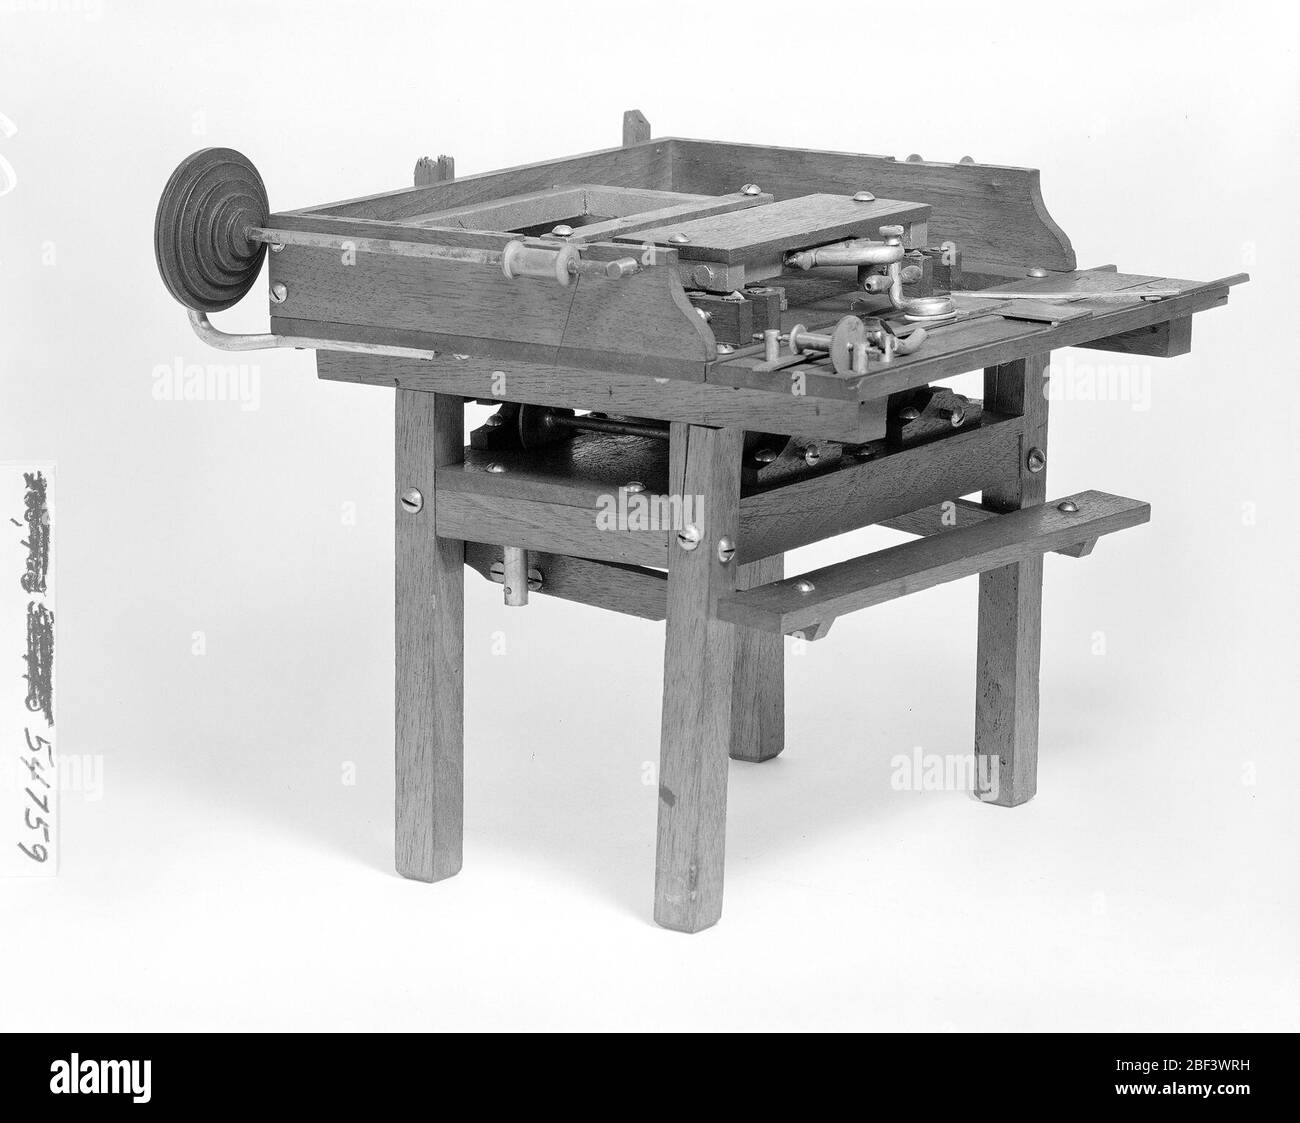 Patent Model of a Pantographic Engraving Machine. This patent model demonstrates an invention for a model of a pantographic engraving machine which was granted patent number 54759. Stock Photo